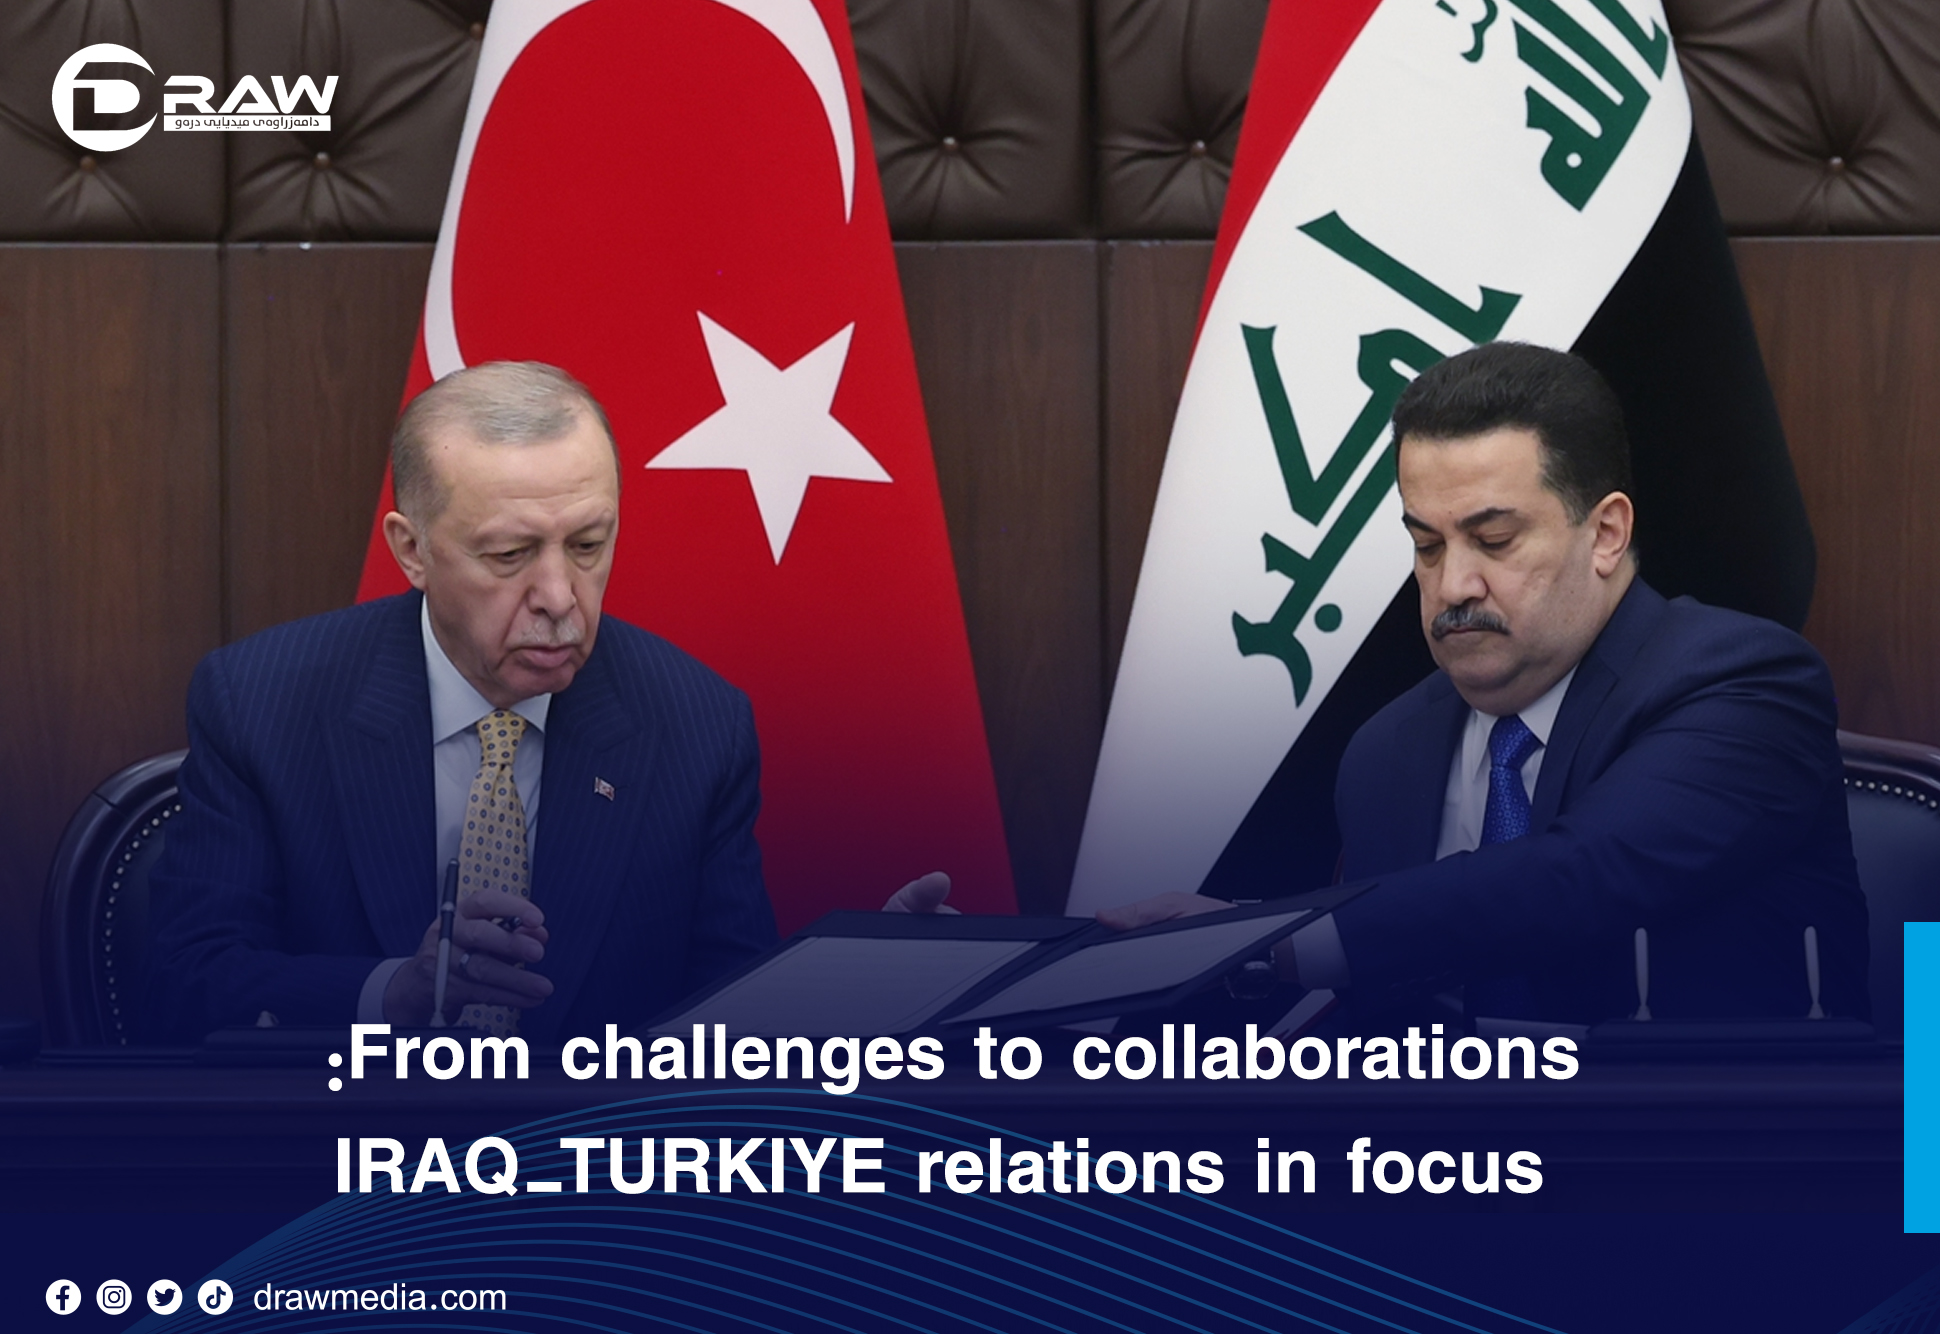 DrawMedia.net / From challenges to collaborations: IRAQ-TURKIYE relations in focus